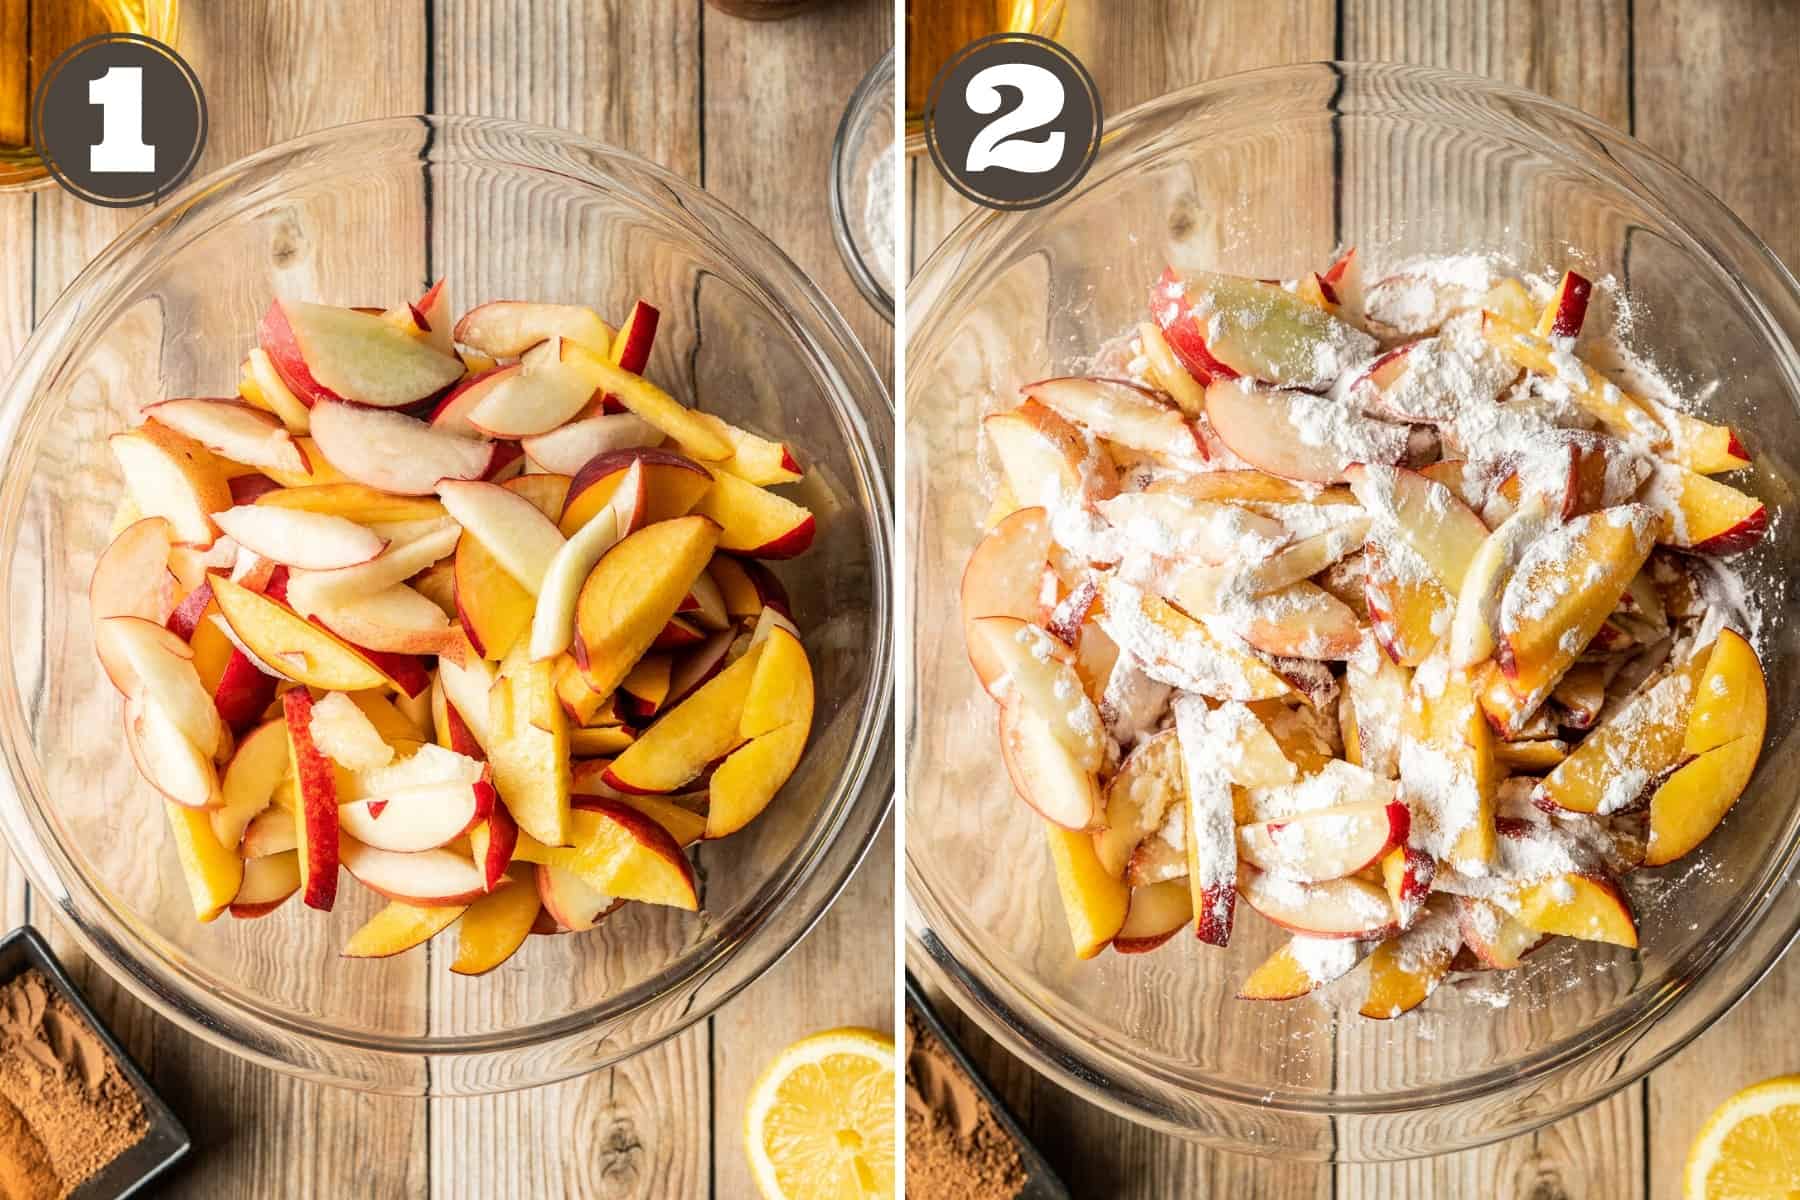 Side by side process photos showing sliced peached in a bowl and sprinkled with tapioca.